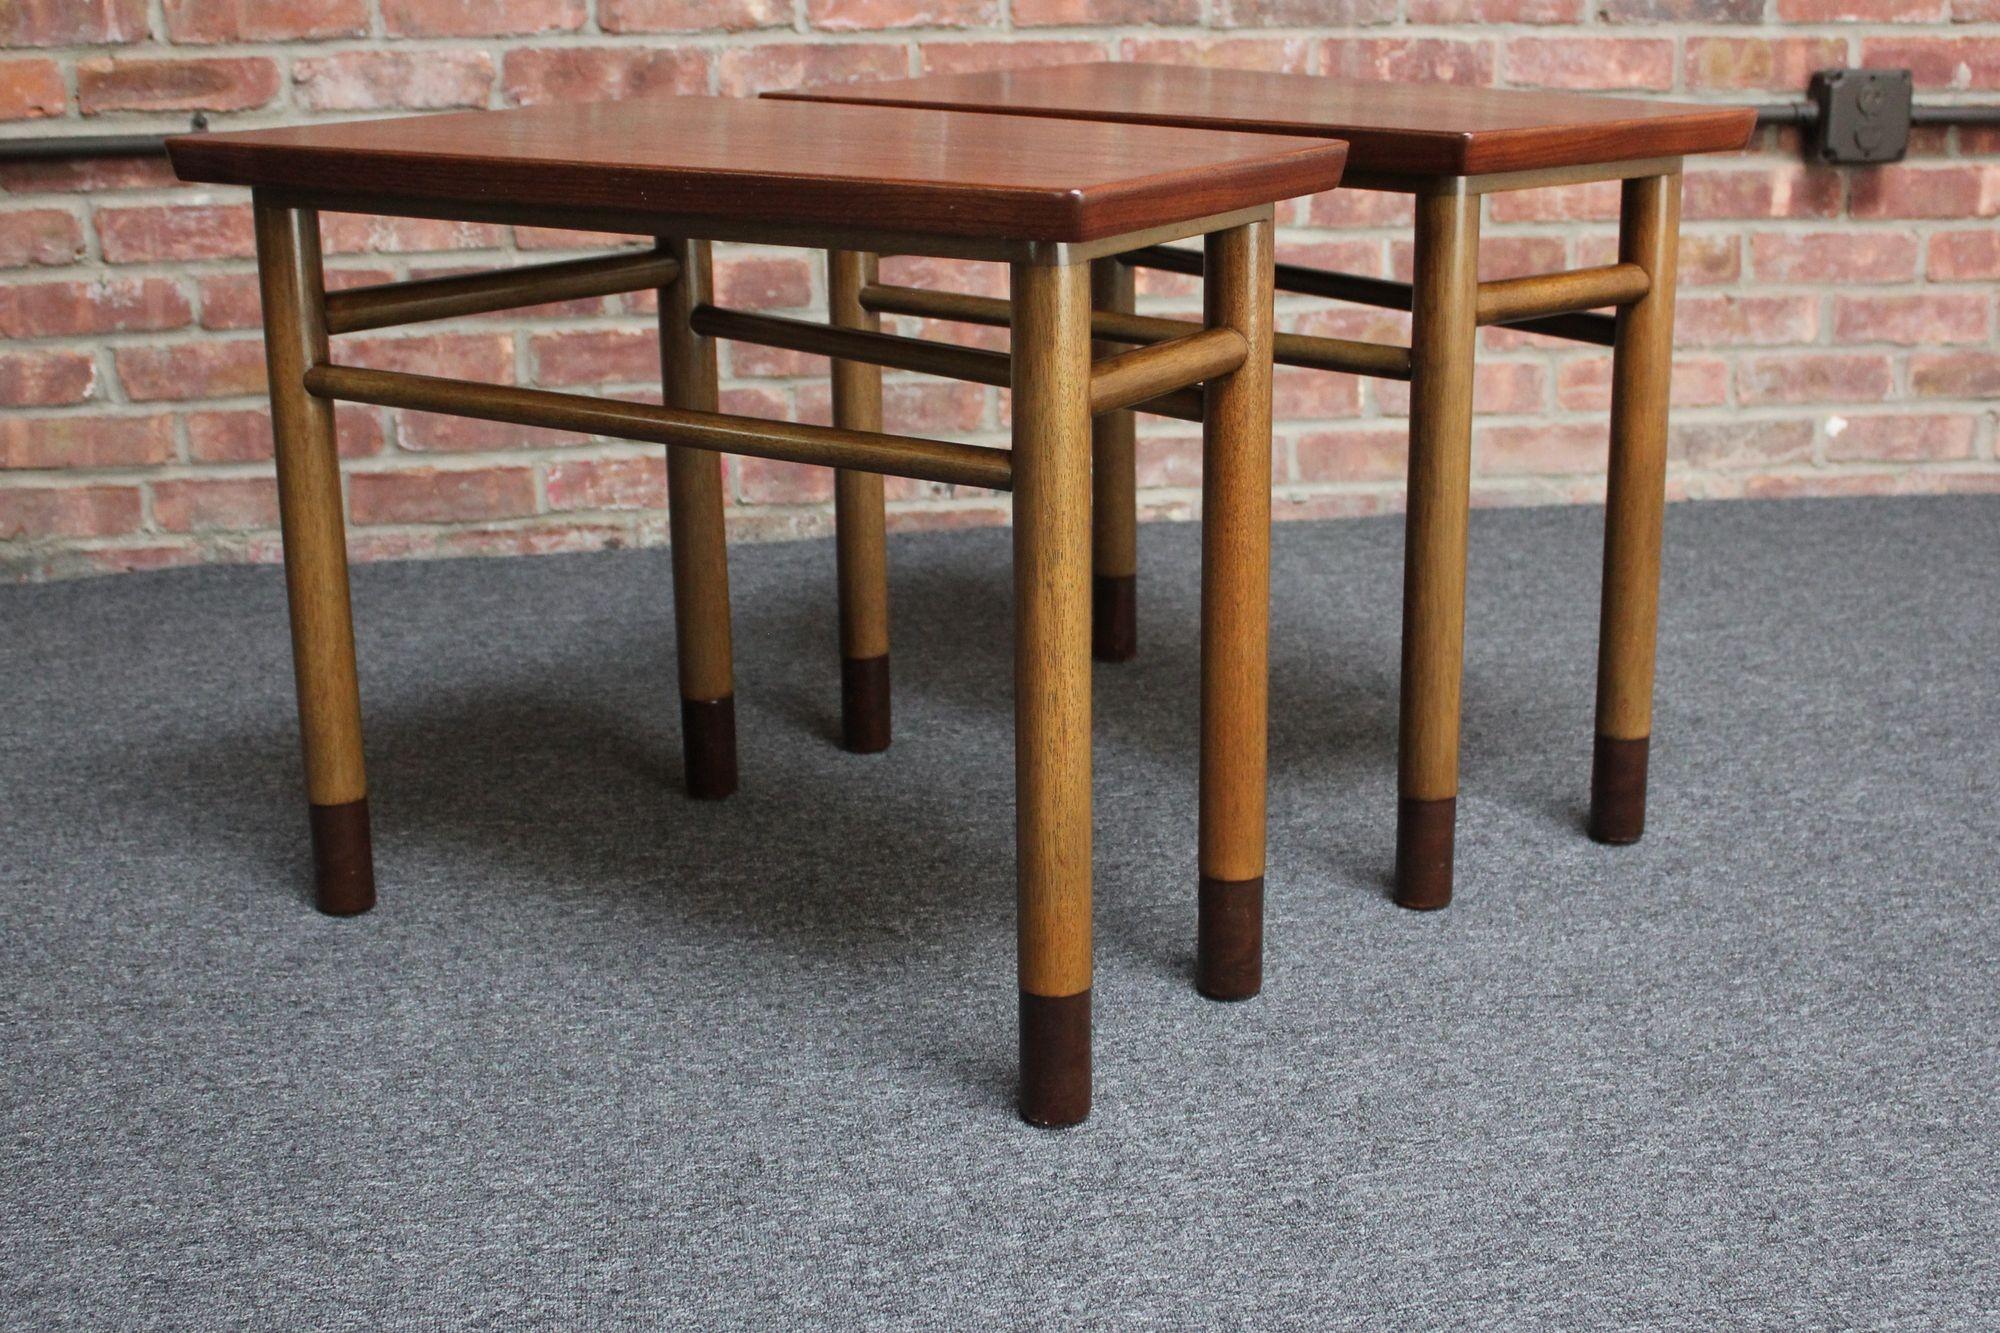 Pair of Edward Wormley for Dunbar walnut wedge/trapezium-form end tables with mahogany stretchers/bases and leather-wrapped feet (model #5216, ca. 1955, Indiana, USA).
Uncommon examples given the table shape and materials employed.
Conservatively